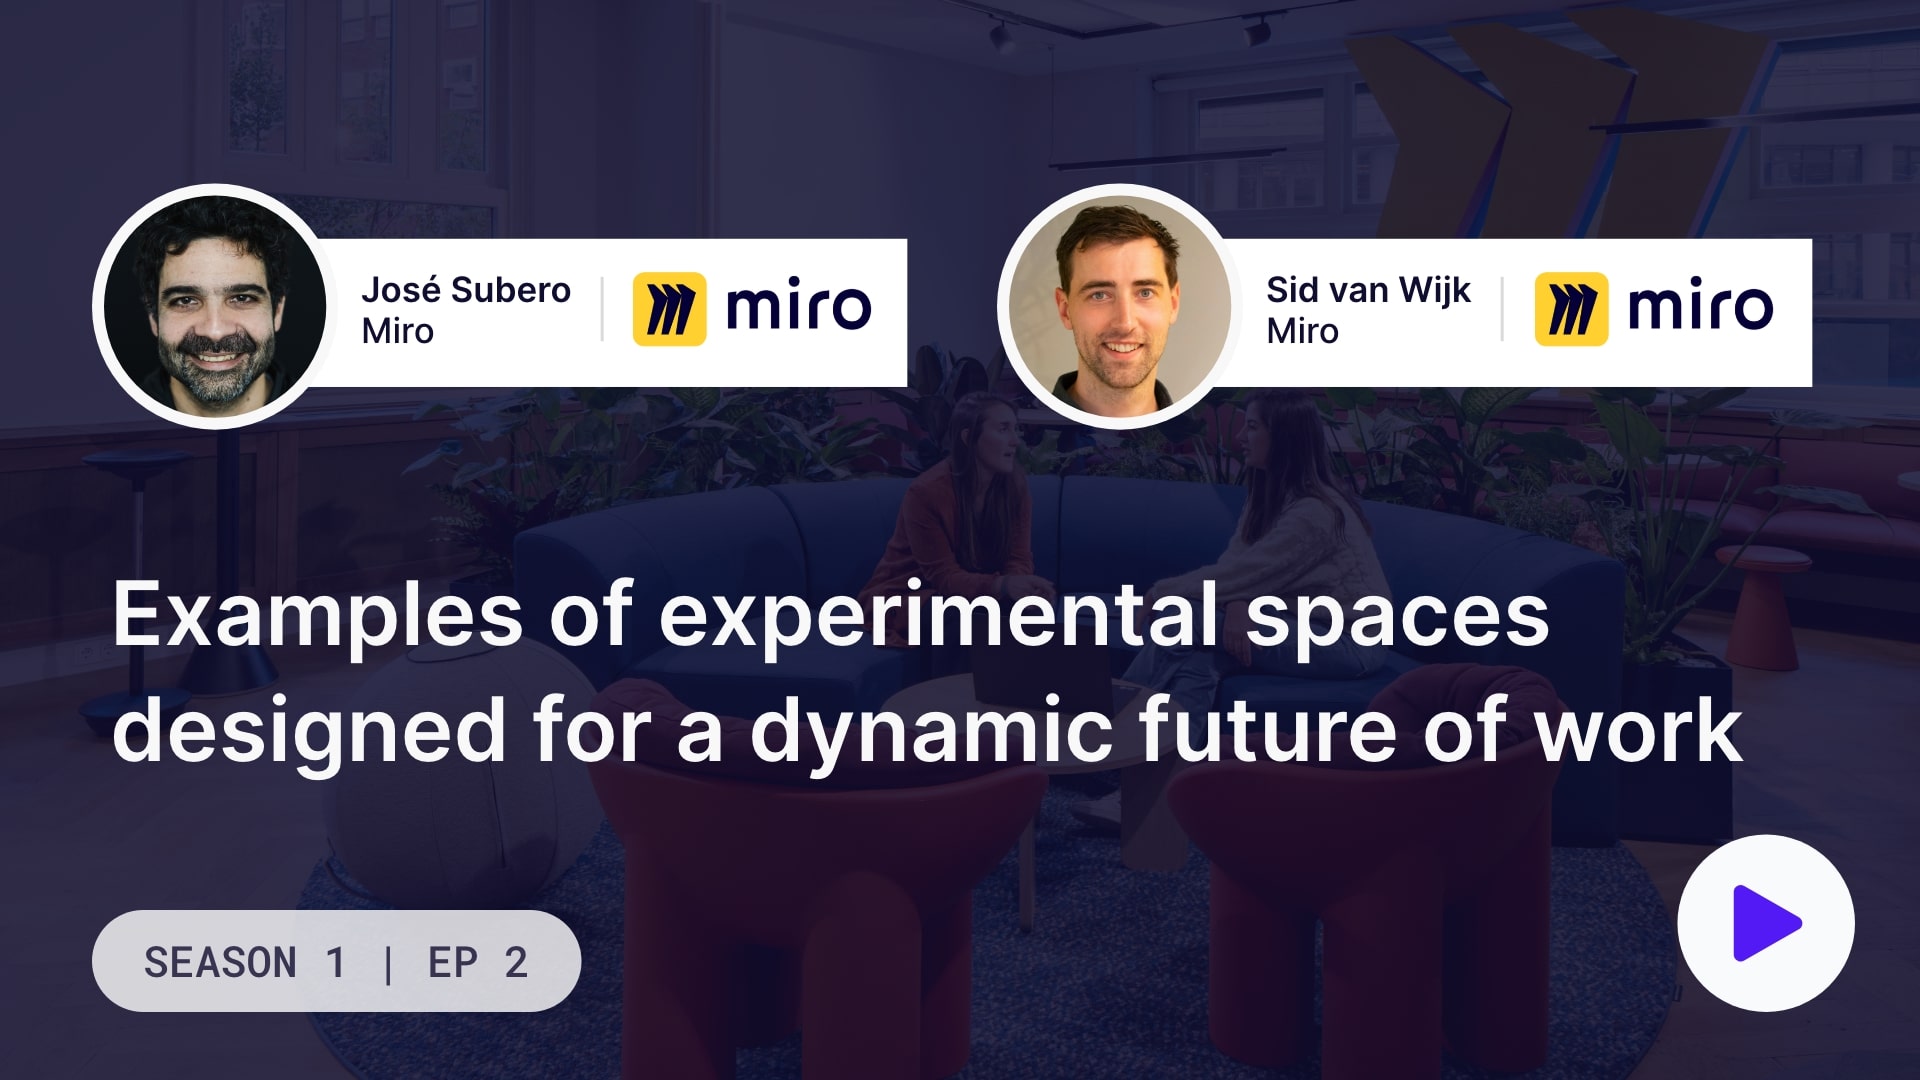 How Miro is Redefining Workspaces Through Experimentation